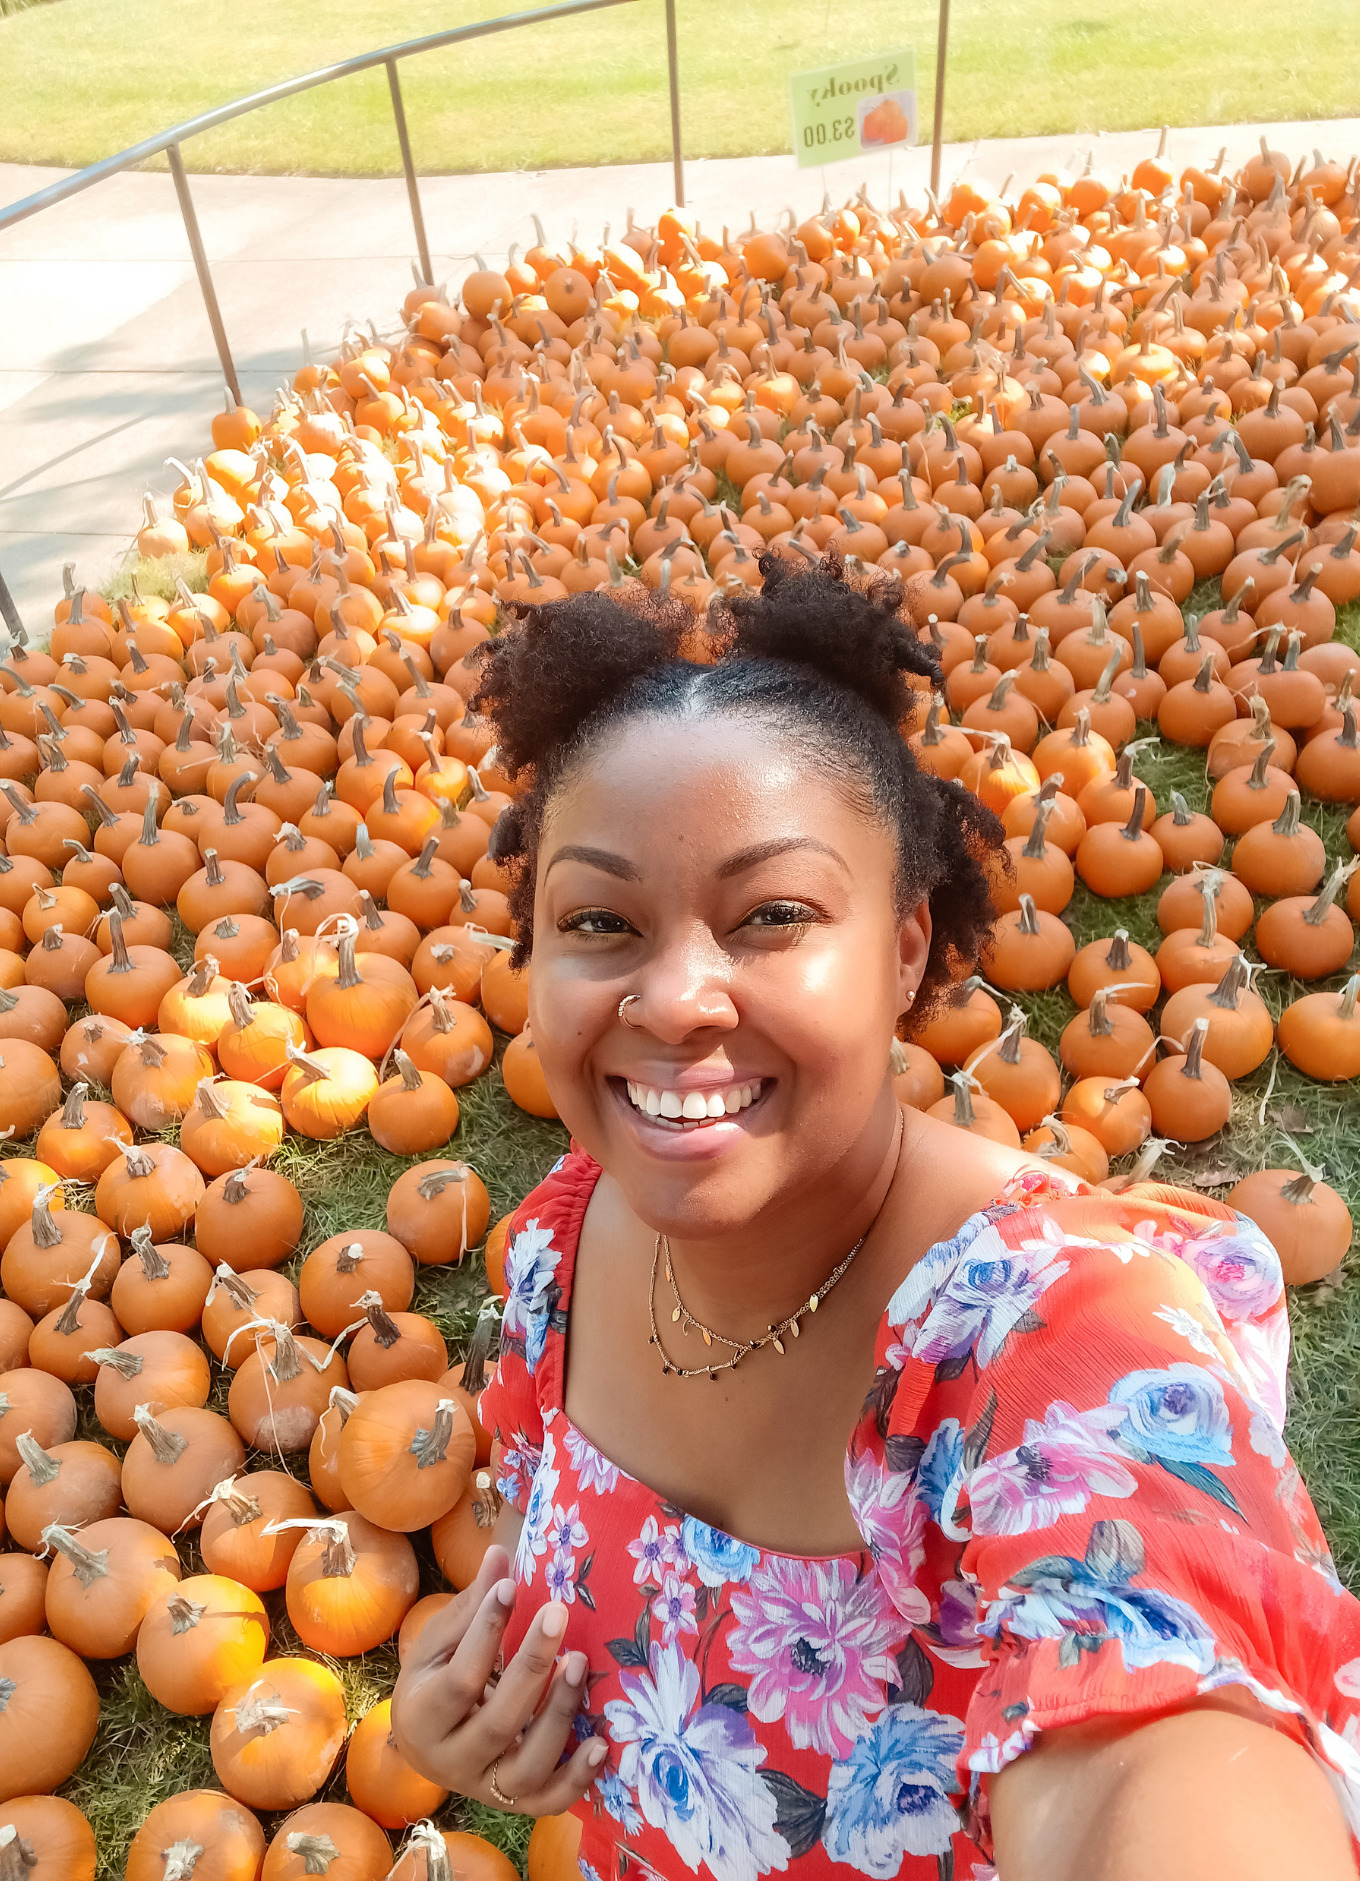 This Bahamian Gyal blogger, Rogan Smith poses in front of dozens of pumpkins